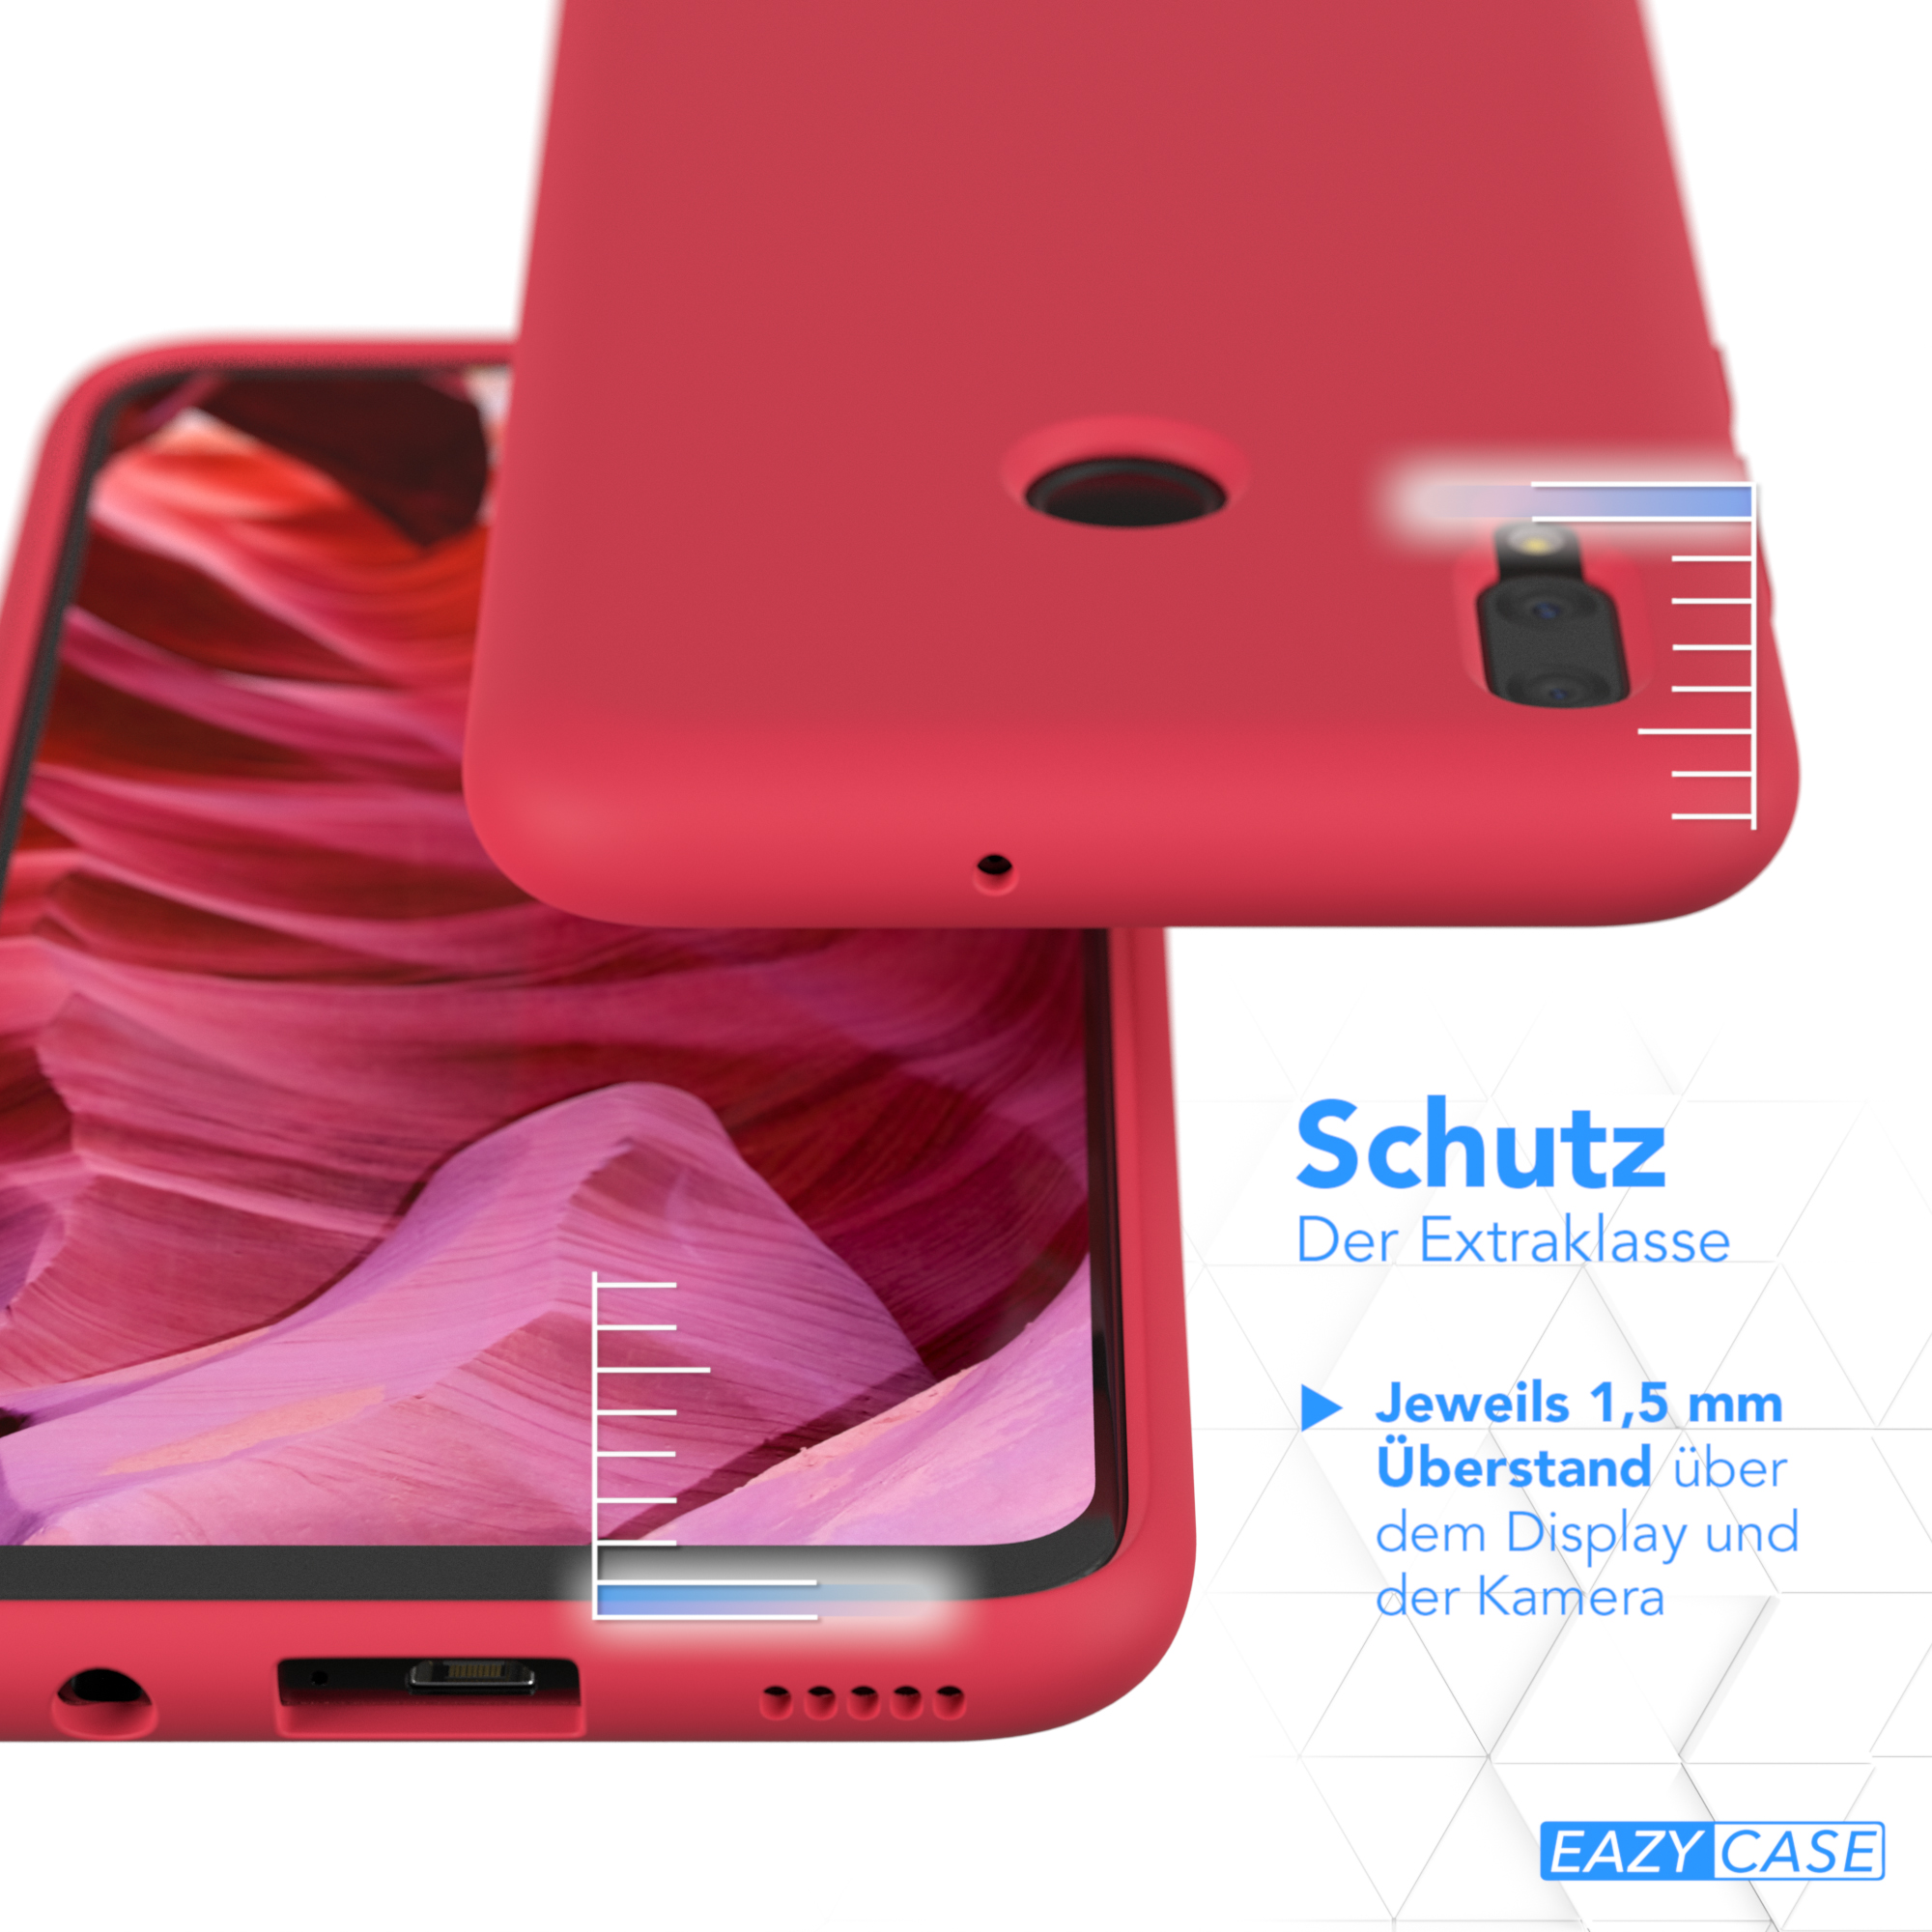 EAZY CASE Premium Silikon Handycase, (2019), P Backcover, / Rot Huawei, Beere Smart